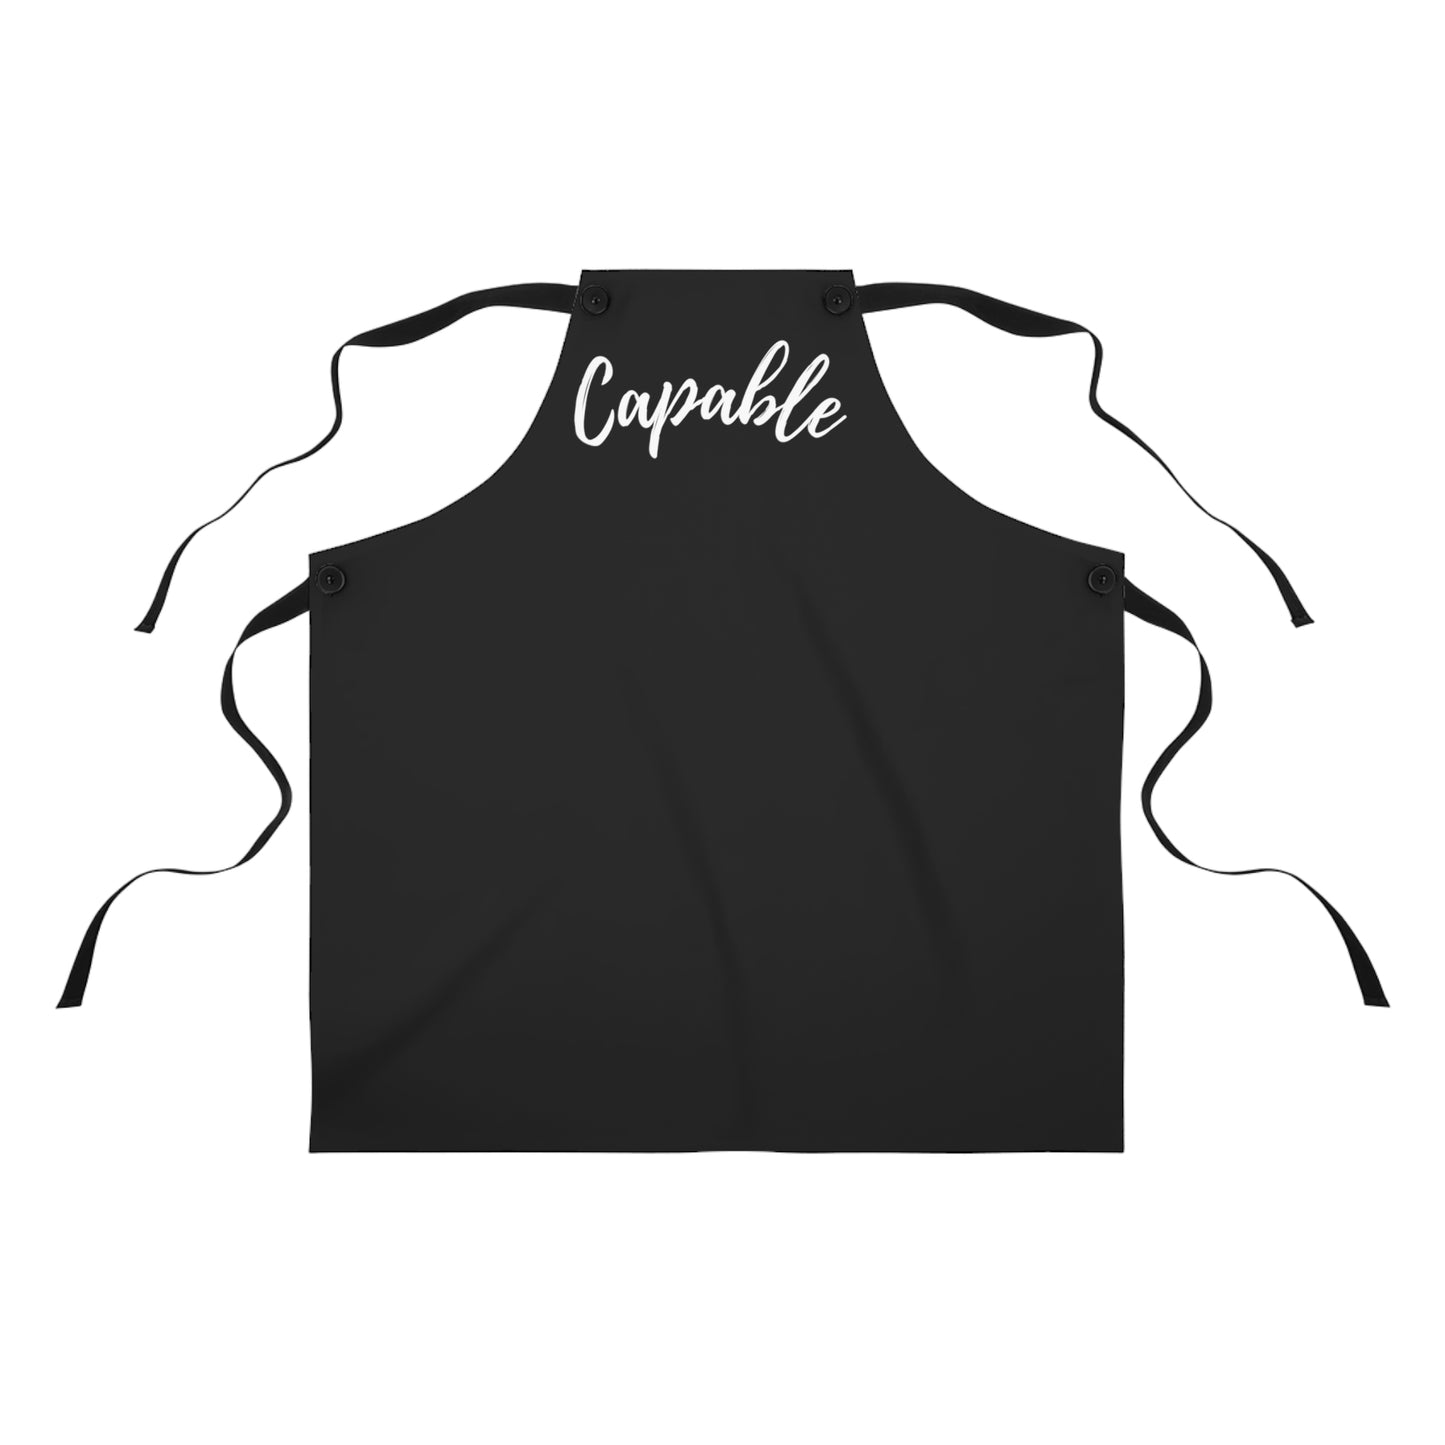 Capable Apron Black with White Lettering